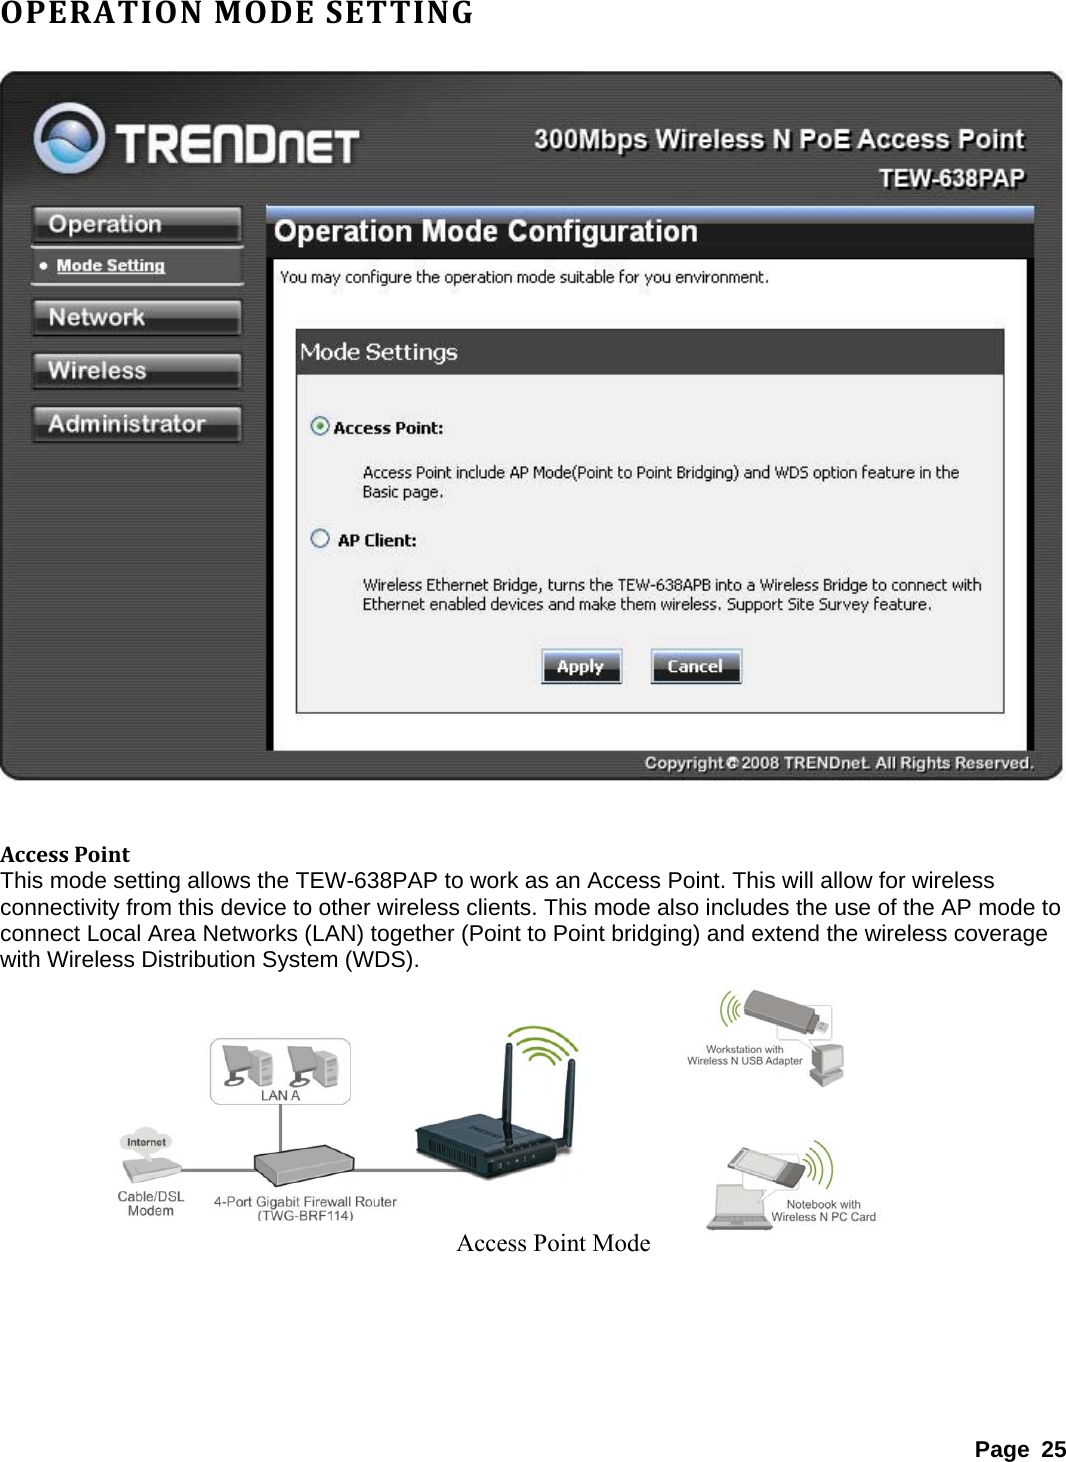 OPERATIONMODESETTING  AccessPointThis mode setting allows the TEW-638PAP to work as an Access Point. This will allow for wireless connectivity from this device to other wireless clients. This mode also includes the use of the AP mode to connect Local Area Networks (LAN) together (Point to Point bridging) and extend the wireless coverage with Wireless Distribution System (WDS).   Access Point Mode         Page 25 